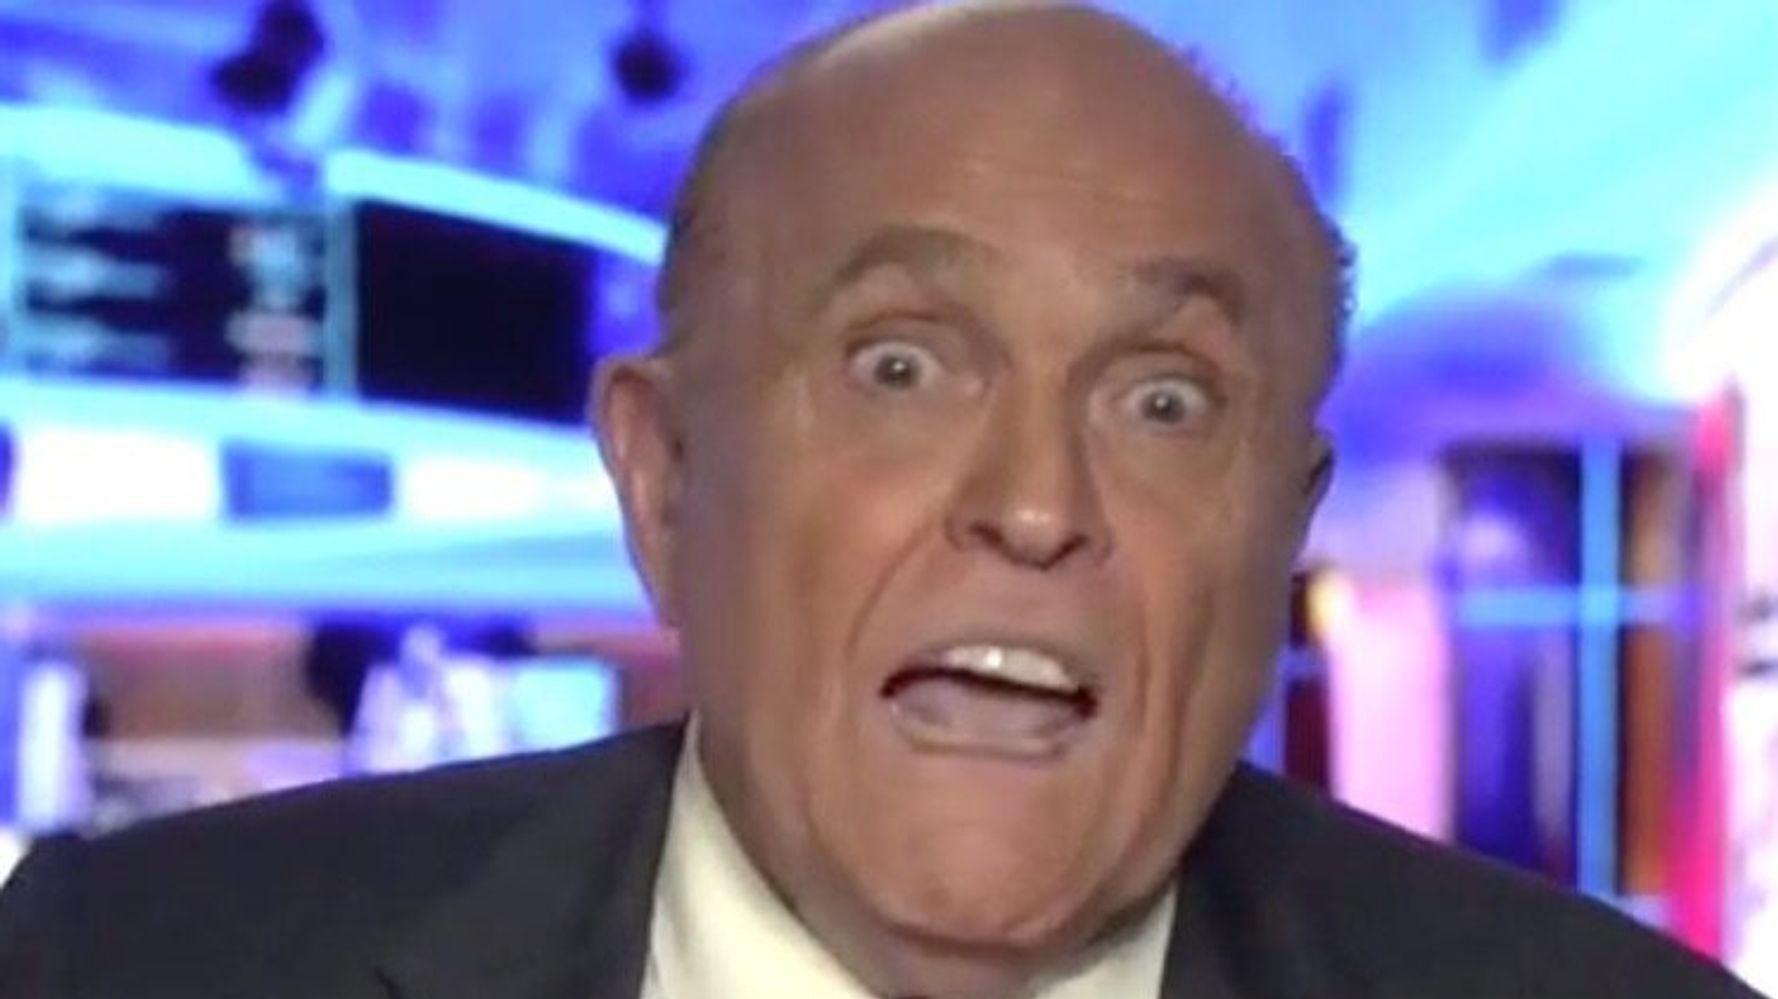 Rudy Giuliani Flips Out On Live TV As Fox Interview Goes Off The Rails